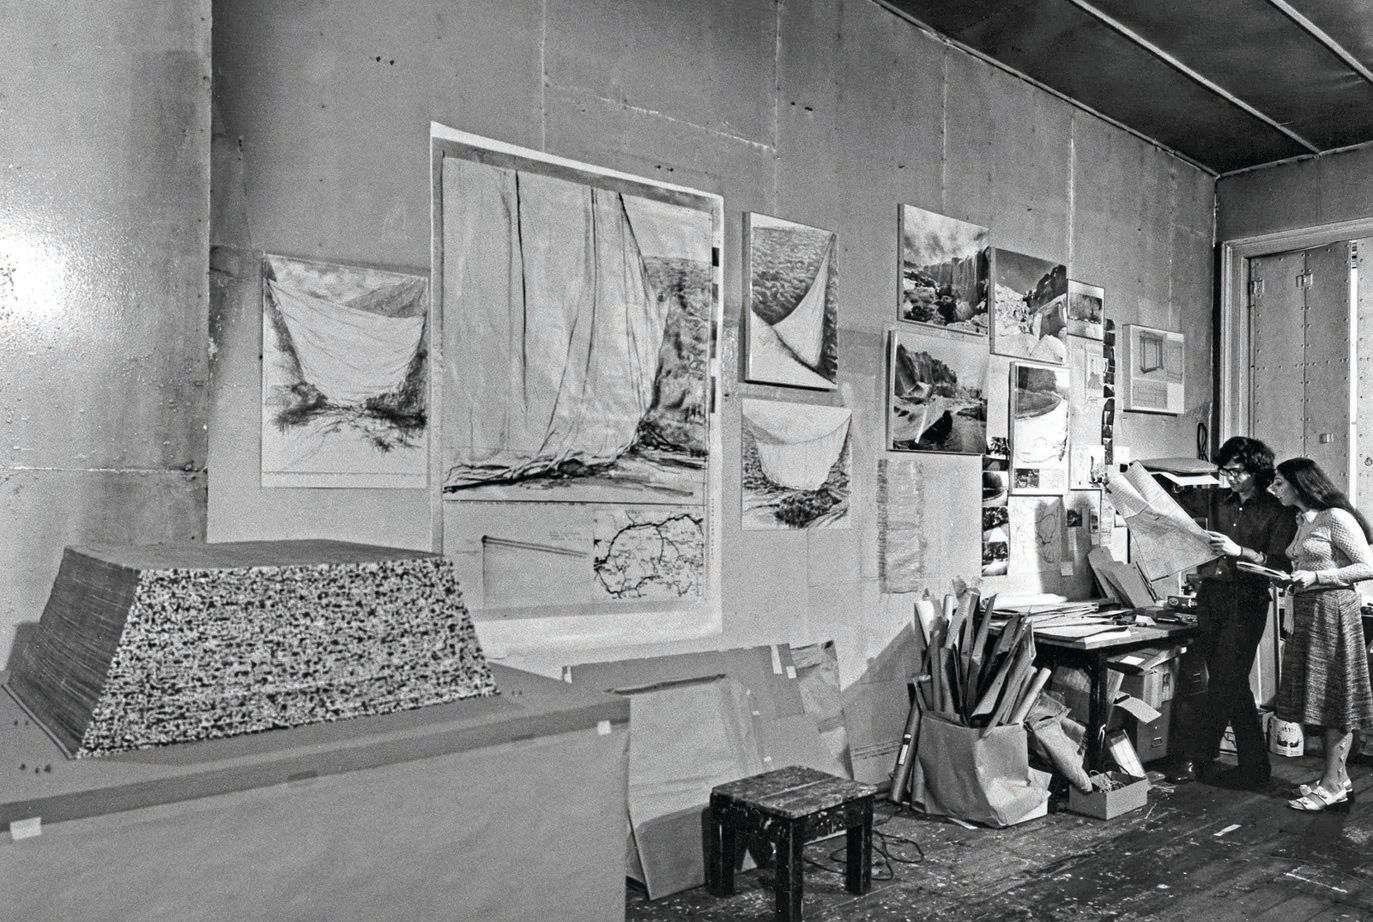 Christo and Jeanne-Claude in their studio with preparatory works for “Valley Curtain” in New York City in 1970. PHOTOGRAPHED BY WOLFGANG VOLZ & SHUNK-KENDER